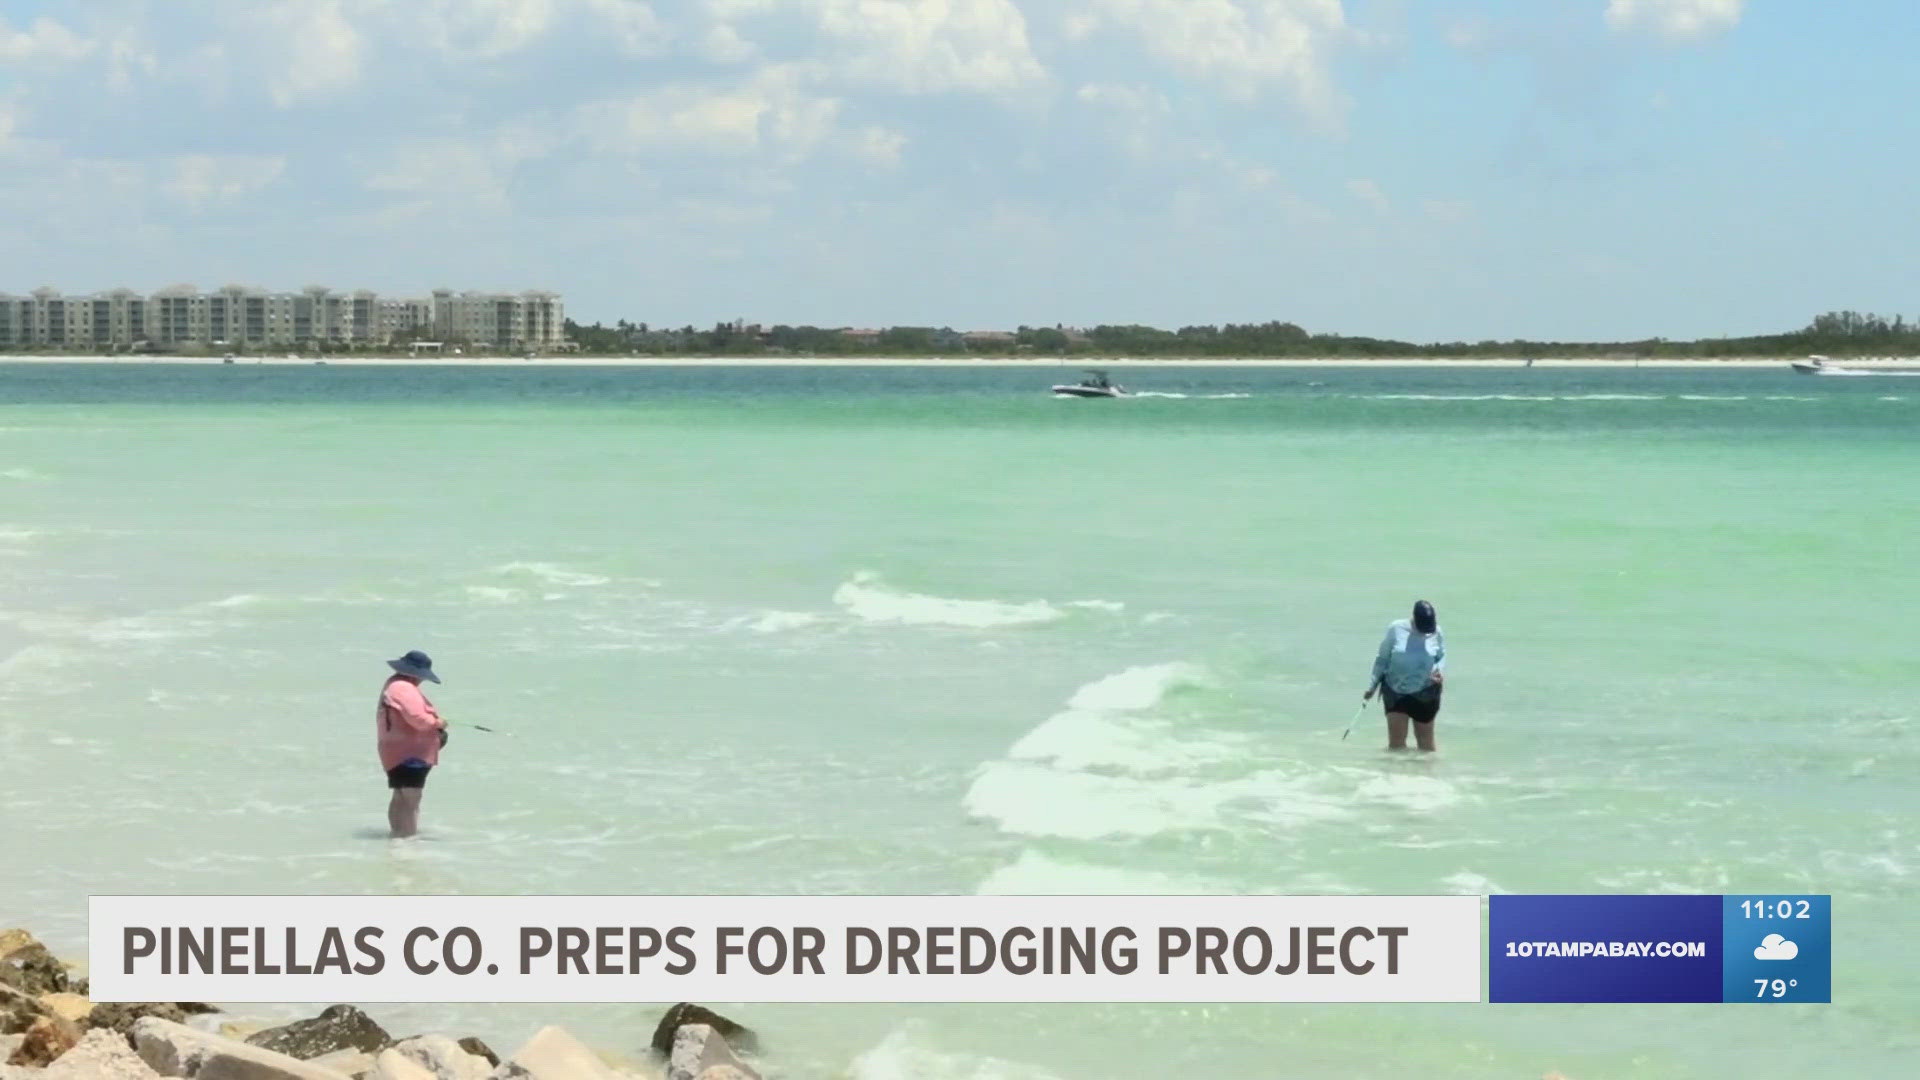 Residents in Tierra Verde are preparing for a long-awaited dredging project in the beach town.